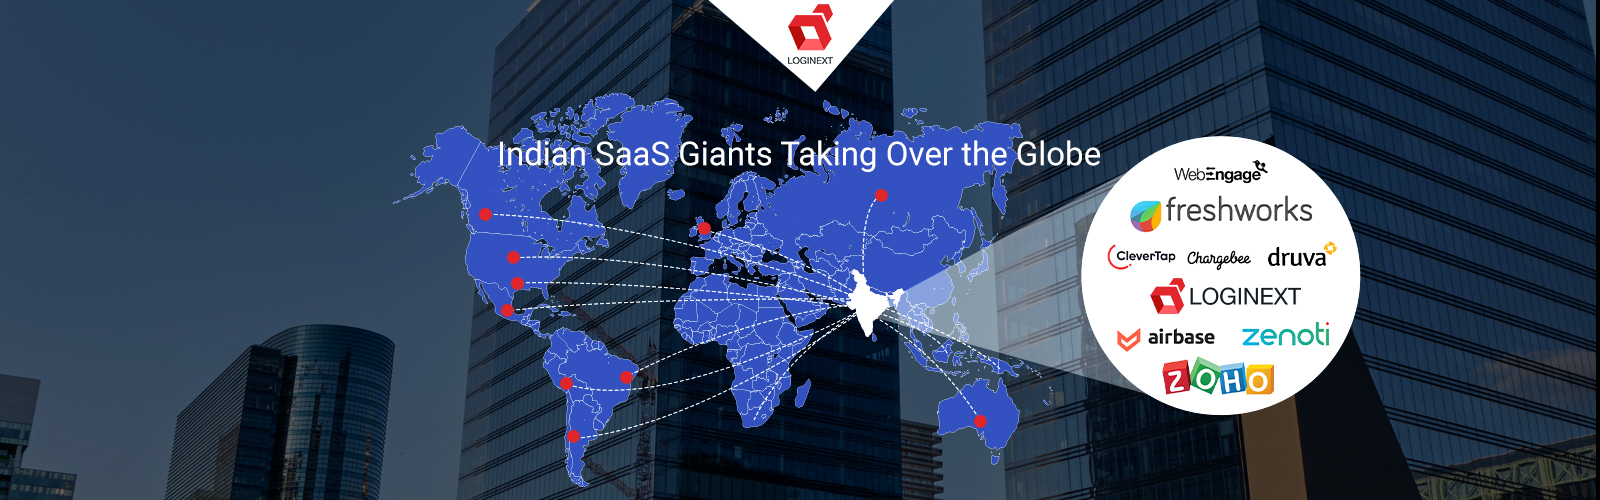 The giant Indian SaaS wave will take over the world by 2025